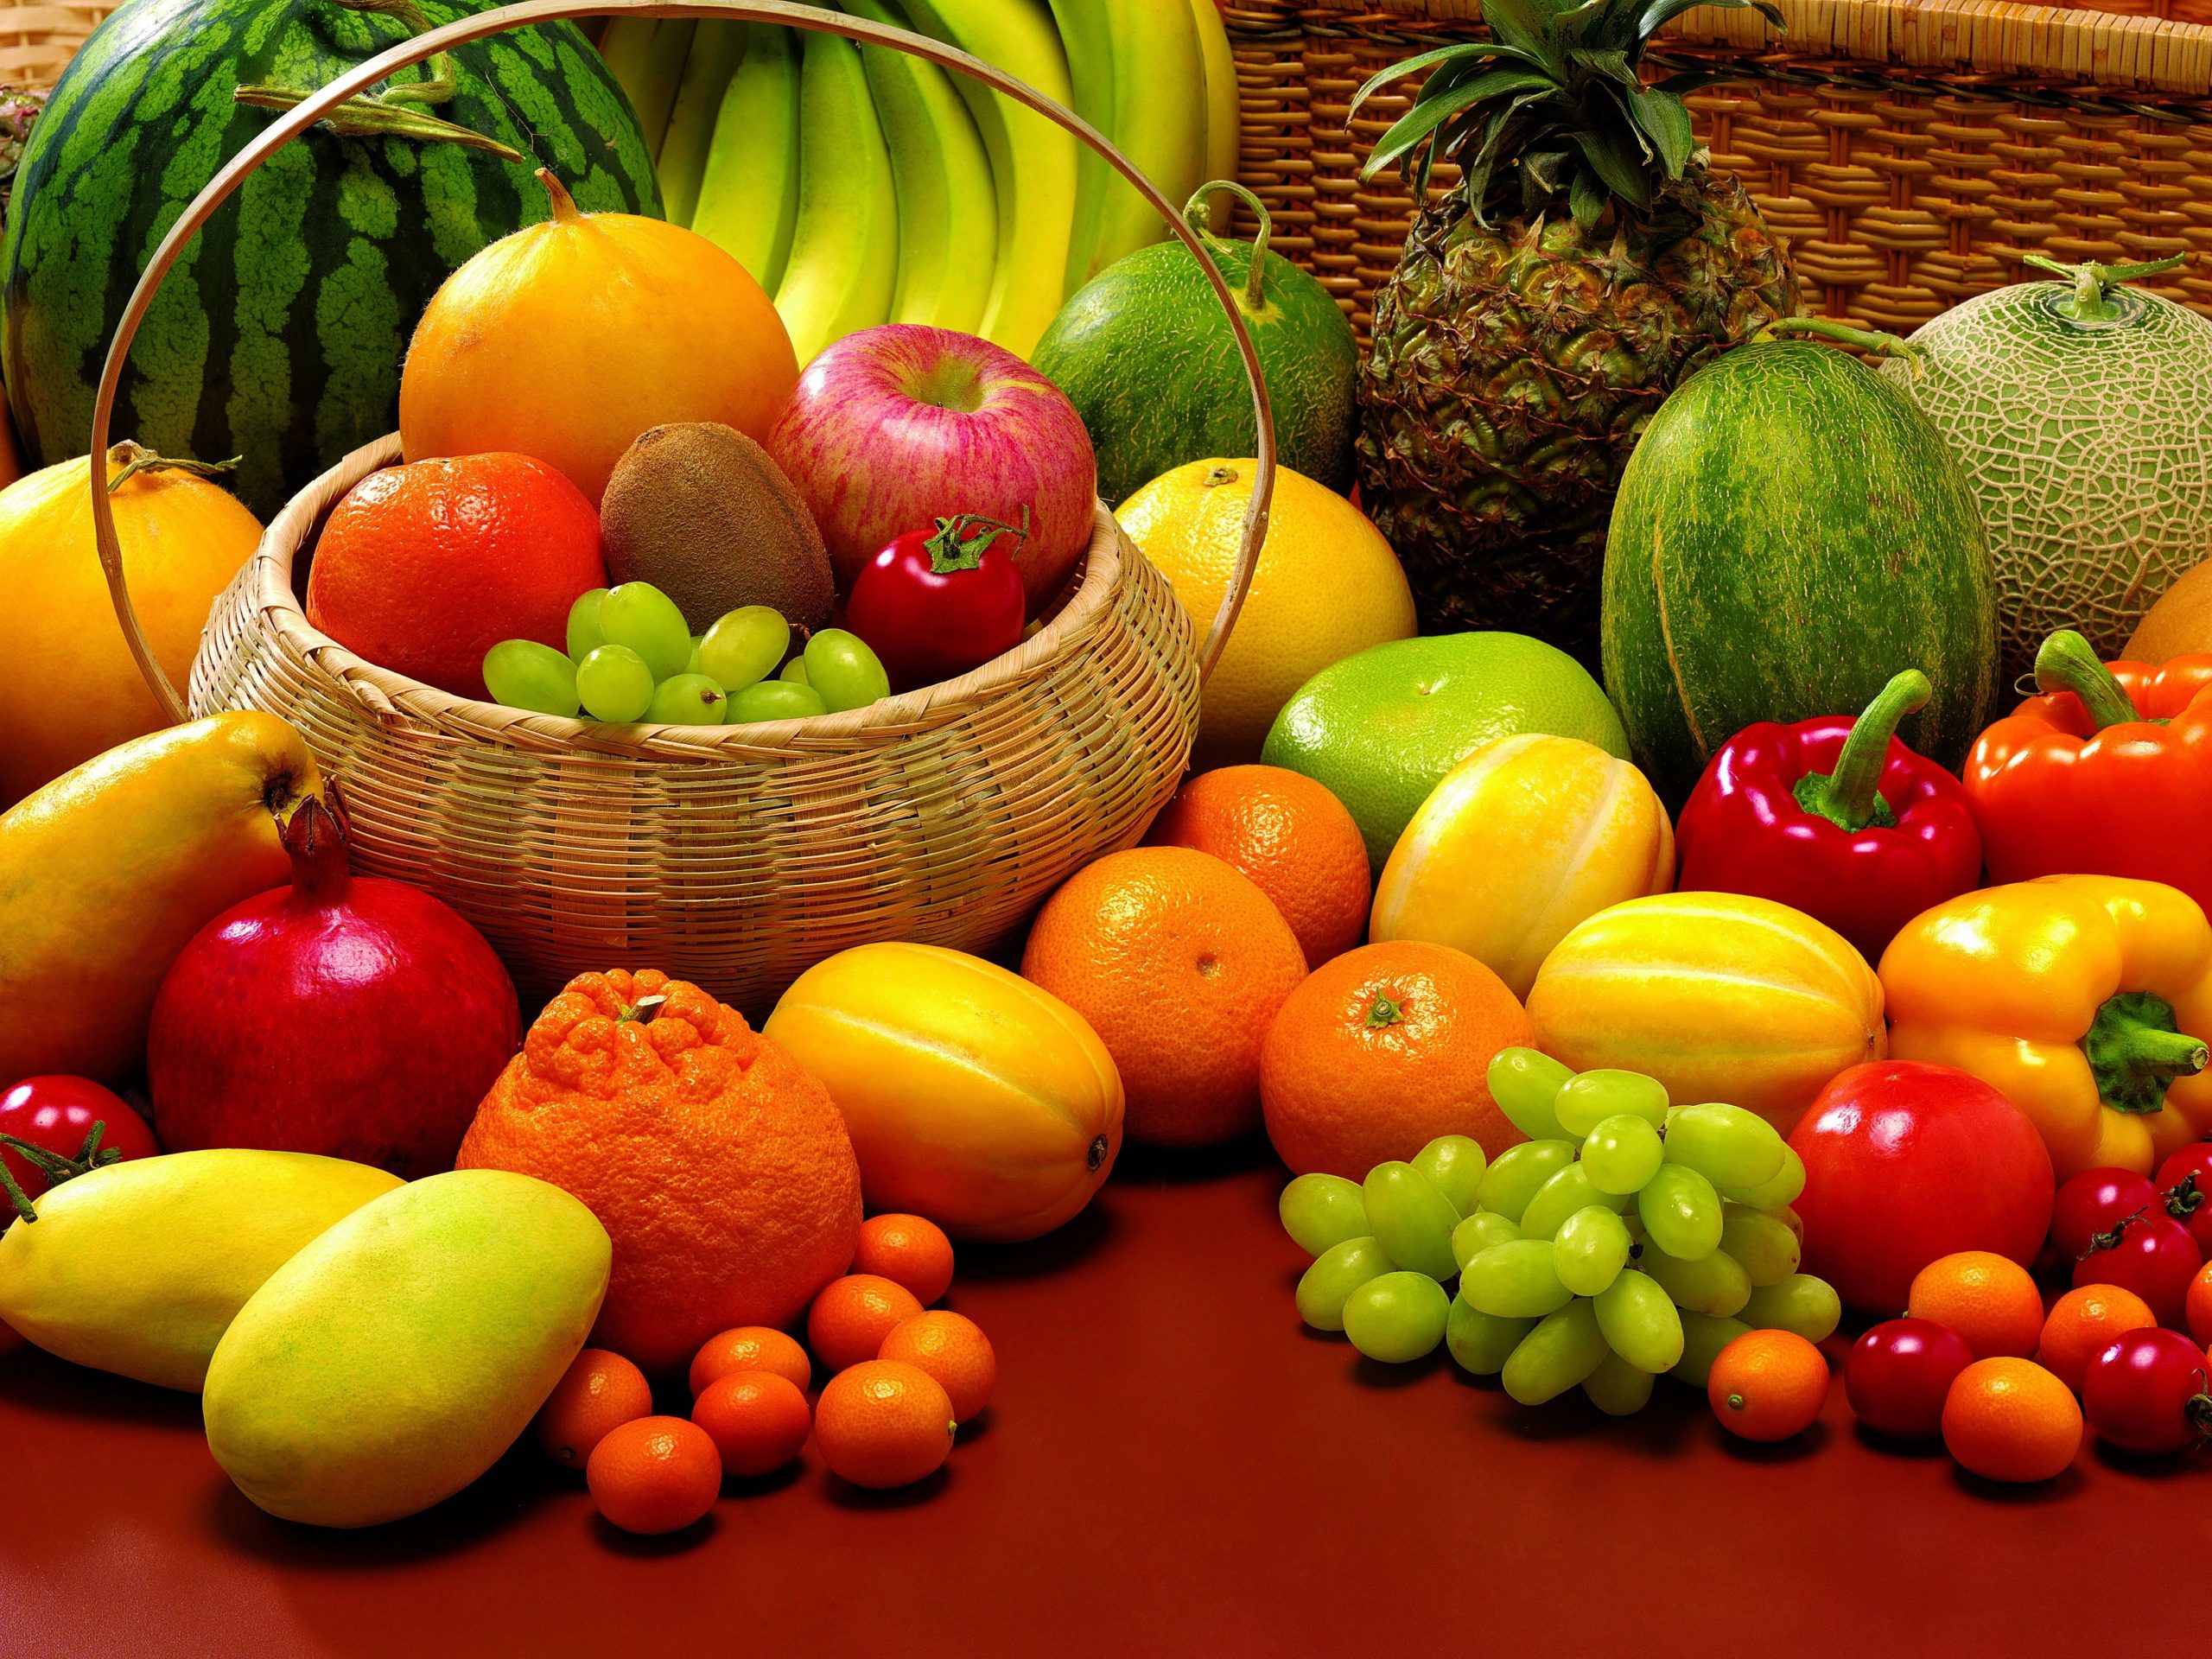 Variety of fruits and vegetables wallpaper, allsorts, pineapple, melon